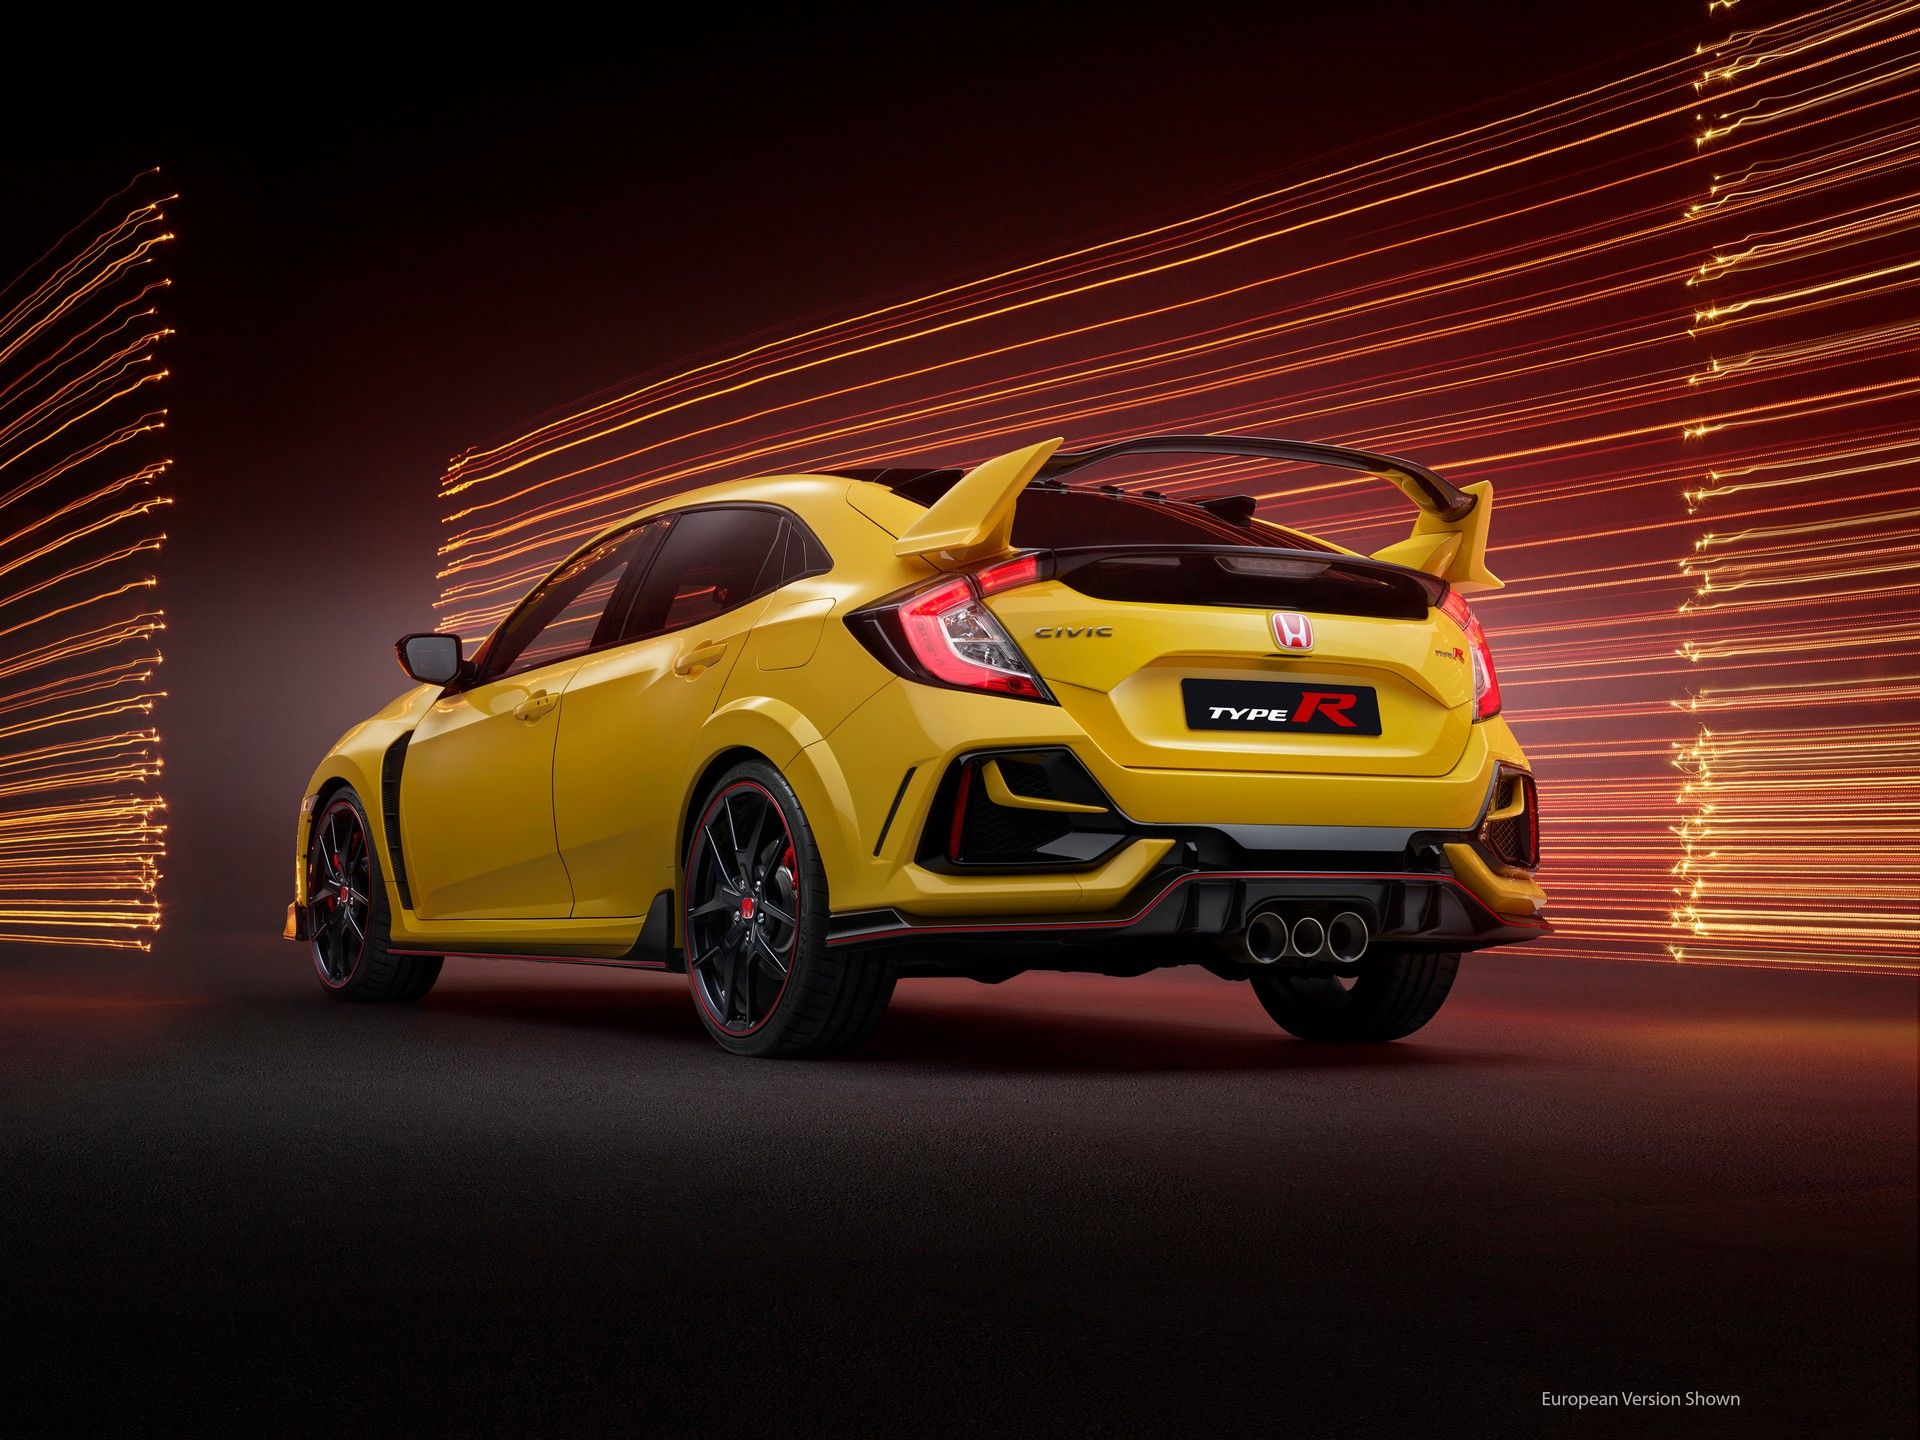 Honda Civic Type R Limited Edition Arriving Stateside With Nearly $000 Price Tag